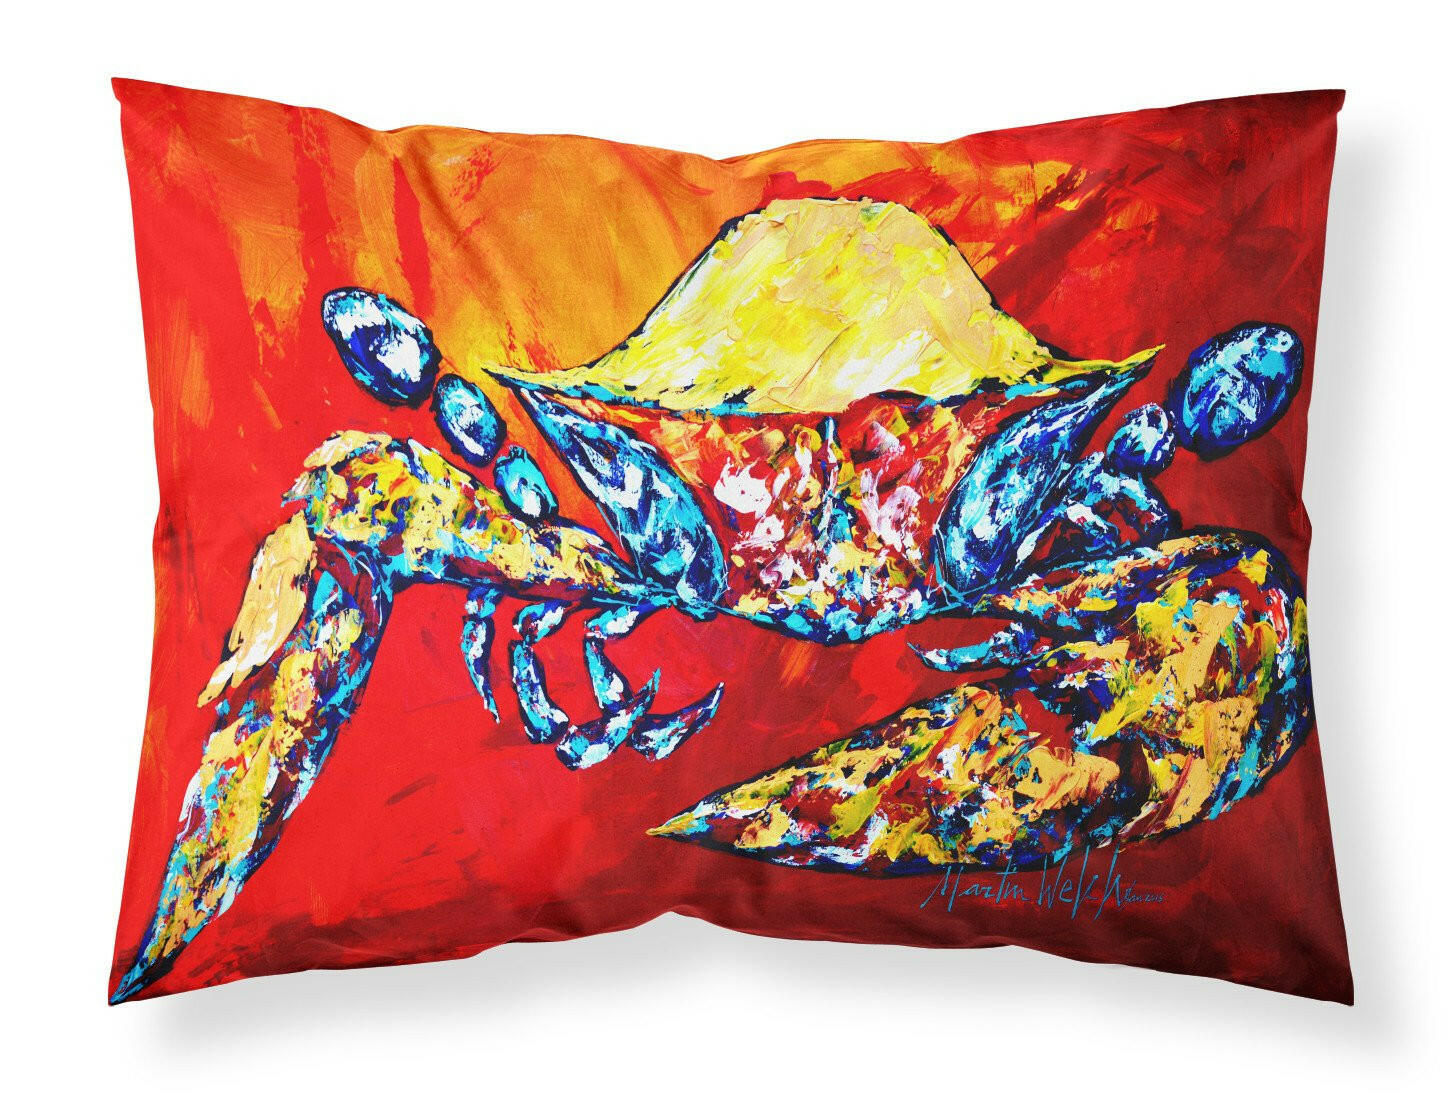 Bring it on Crab in Red Fabric Standard Pillowcase MW1208PILLOWCASE by Caroline's Treasures